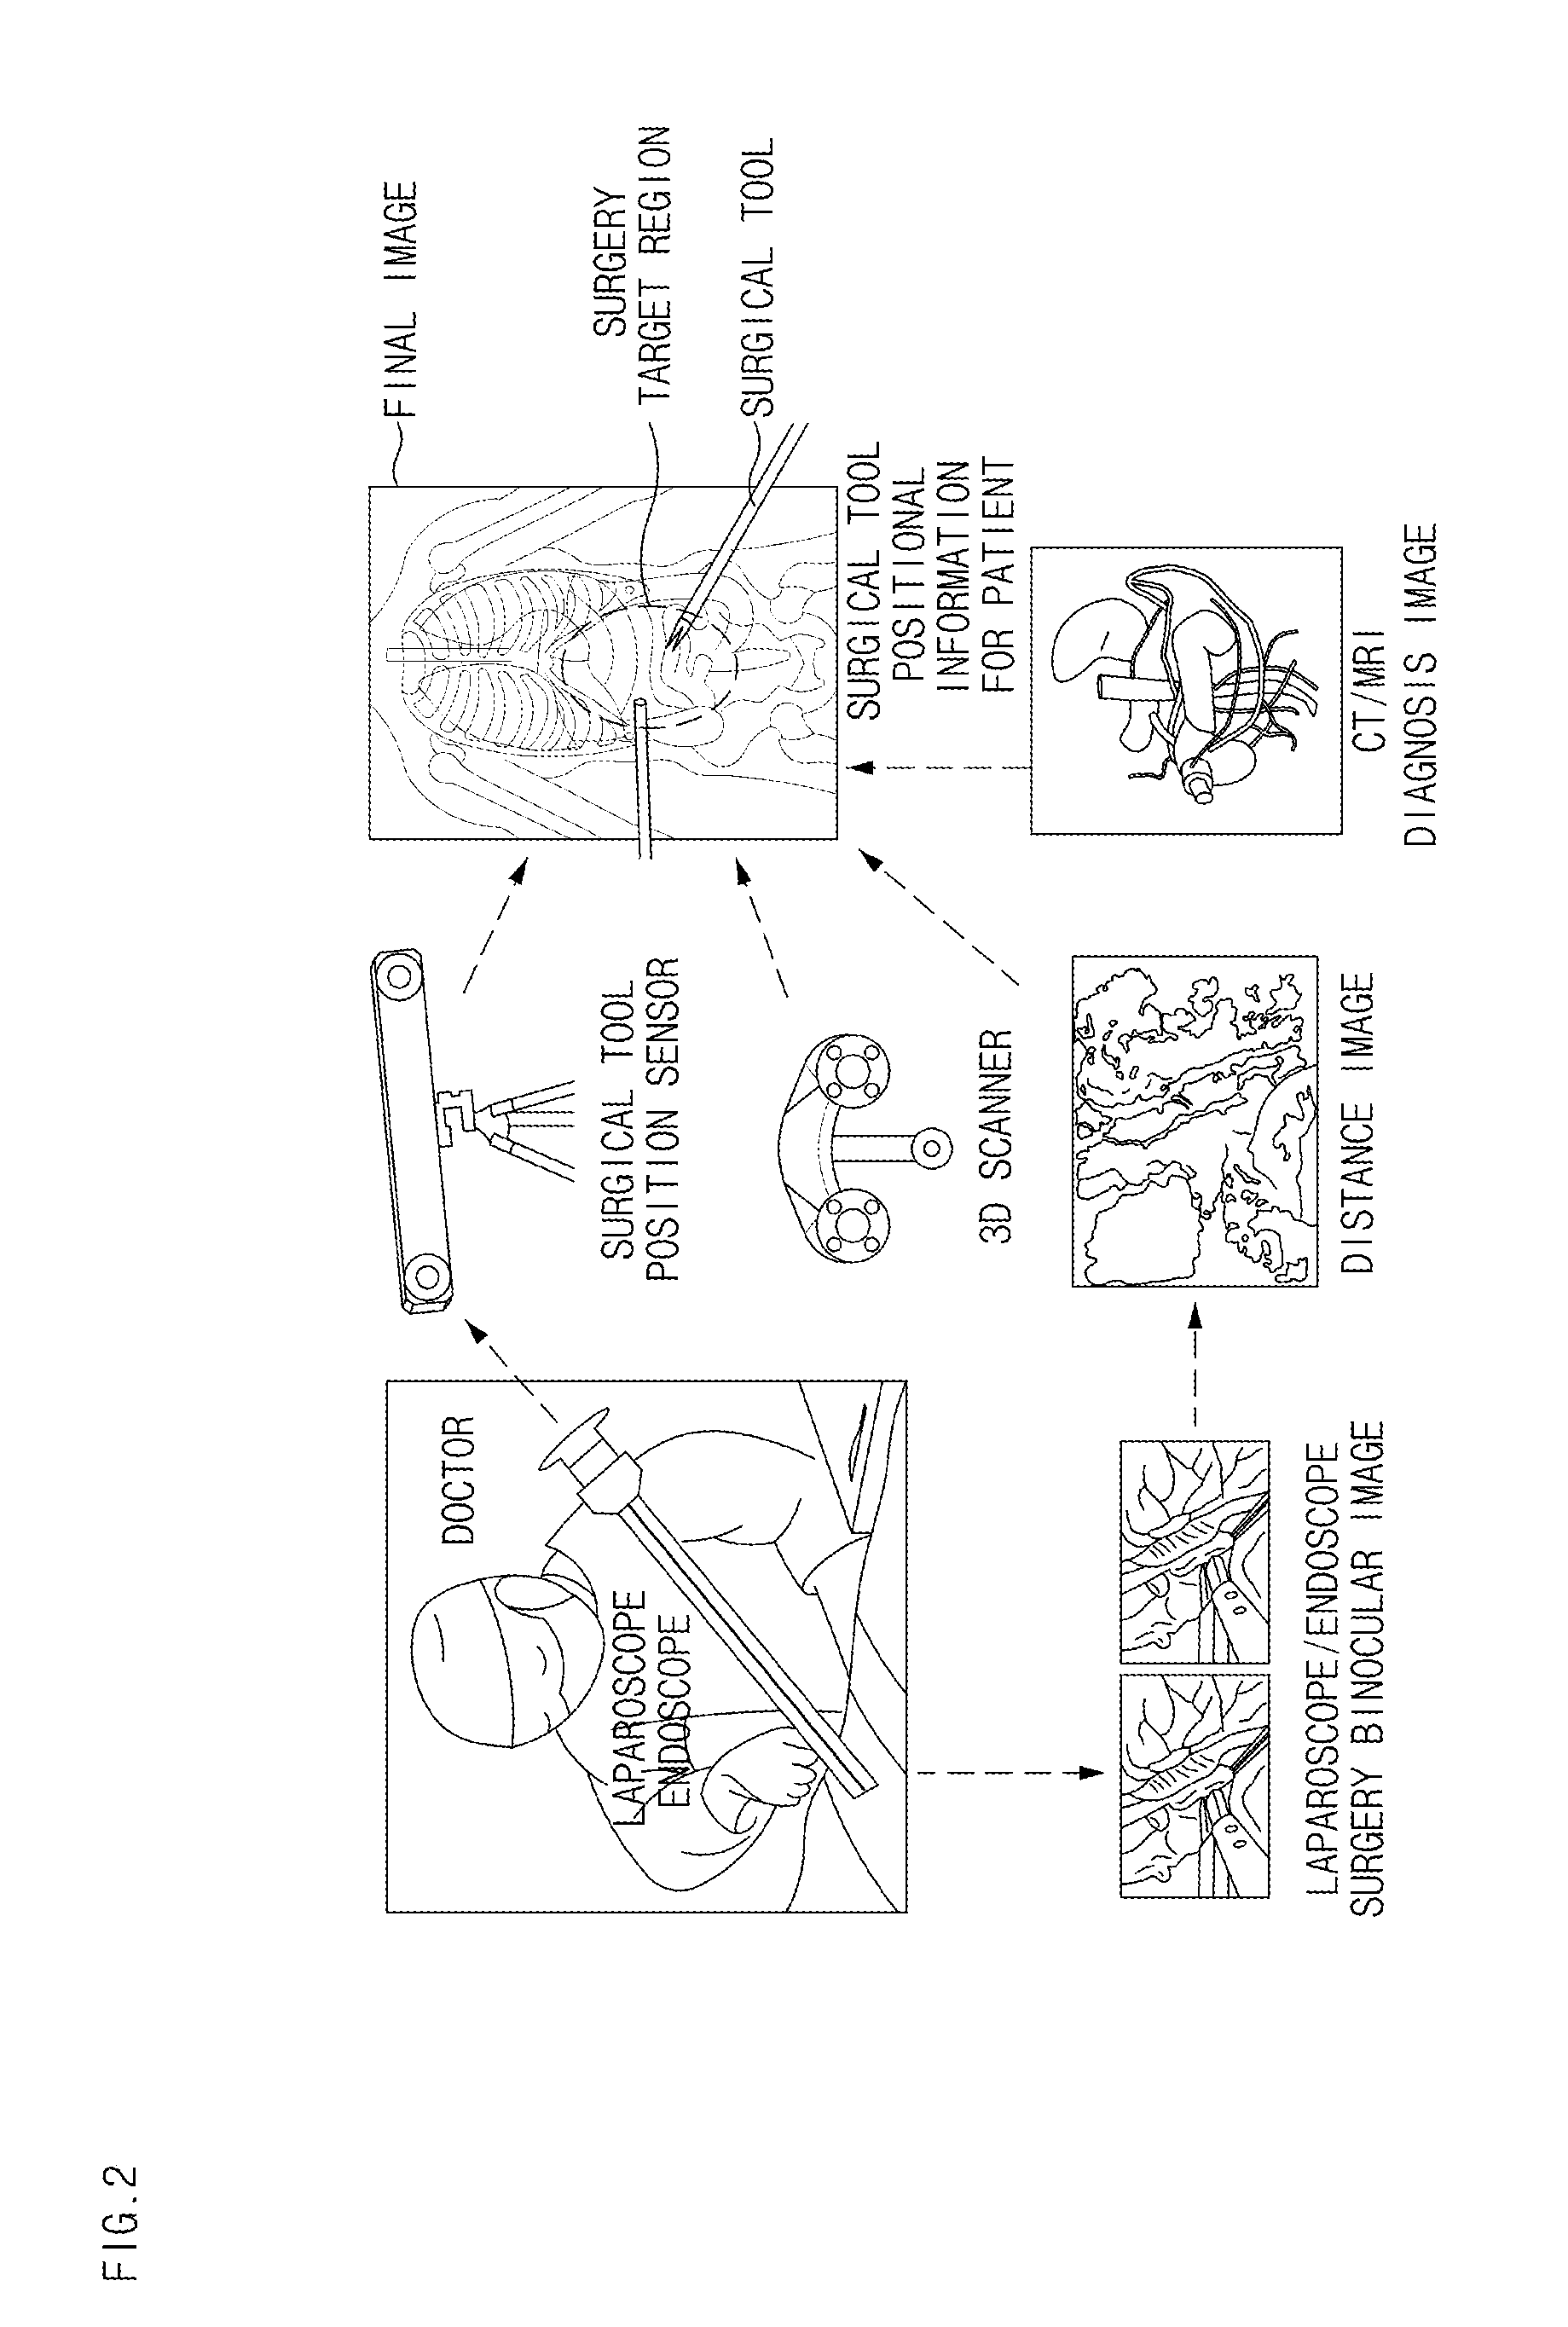 Method and apparatus for coordinating position of surgery region and surgical tool during image guided surgery